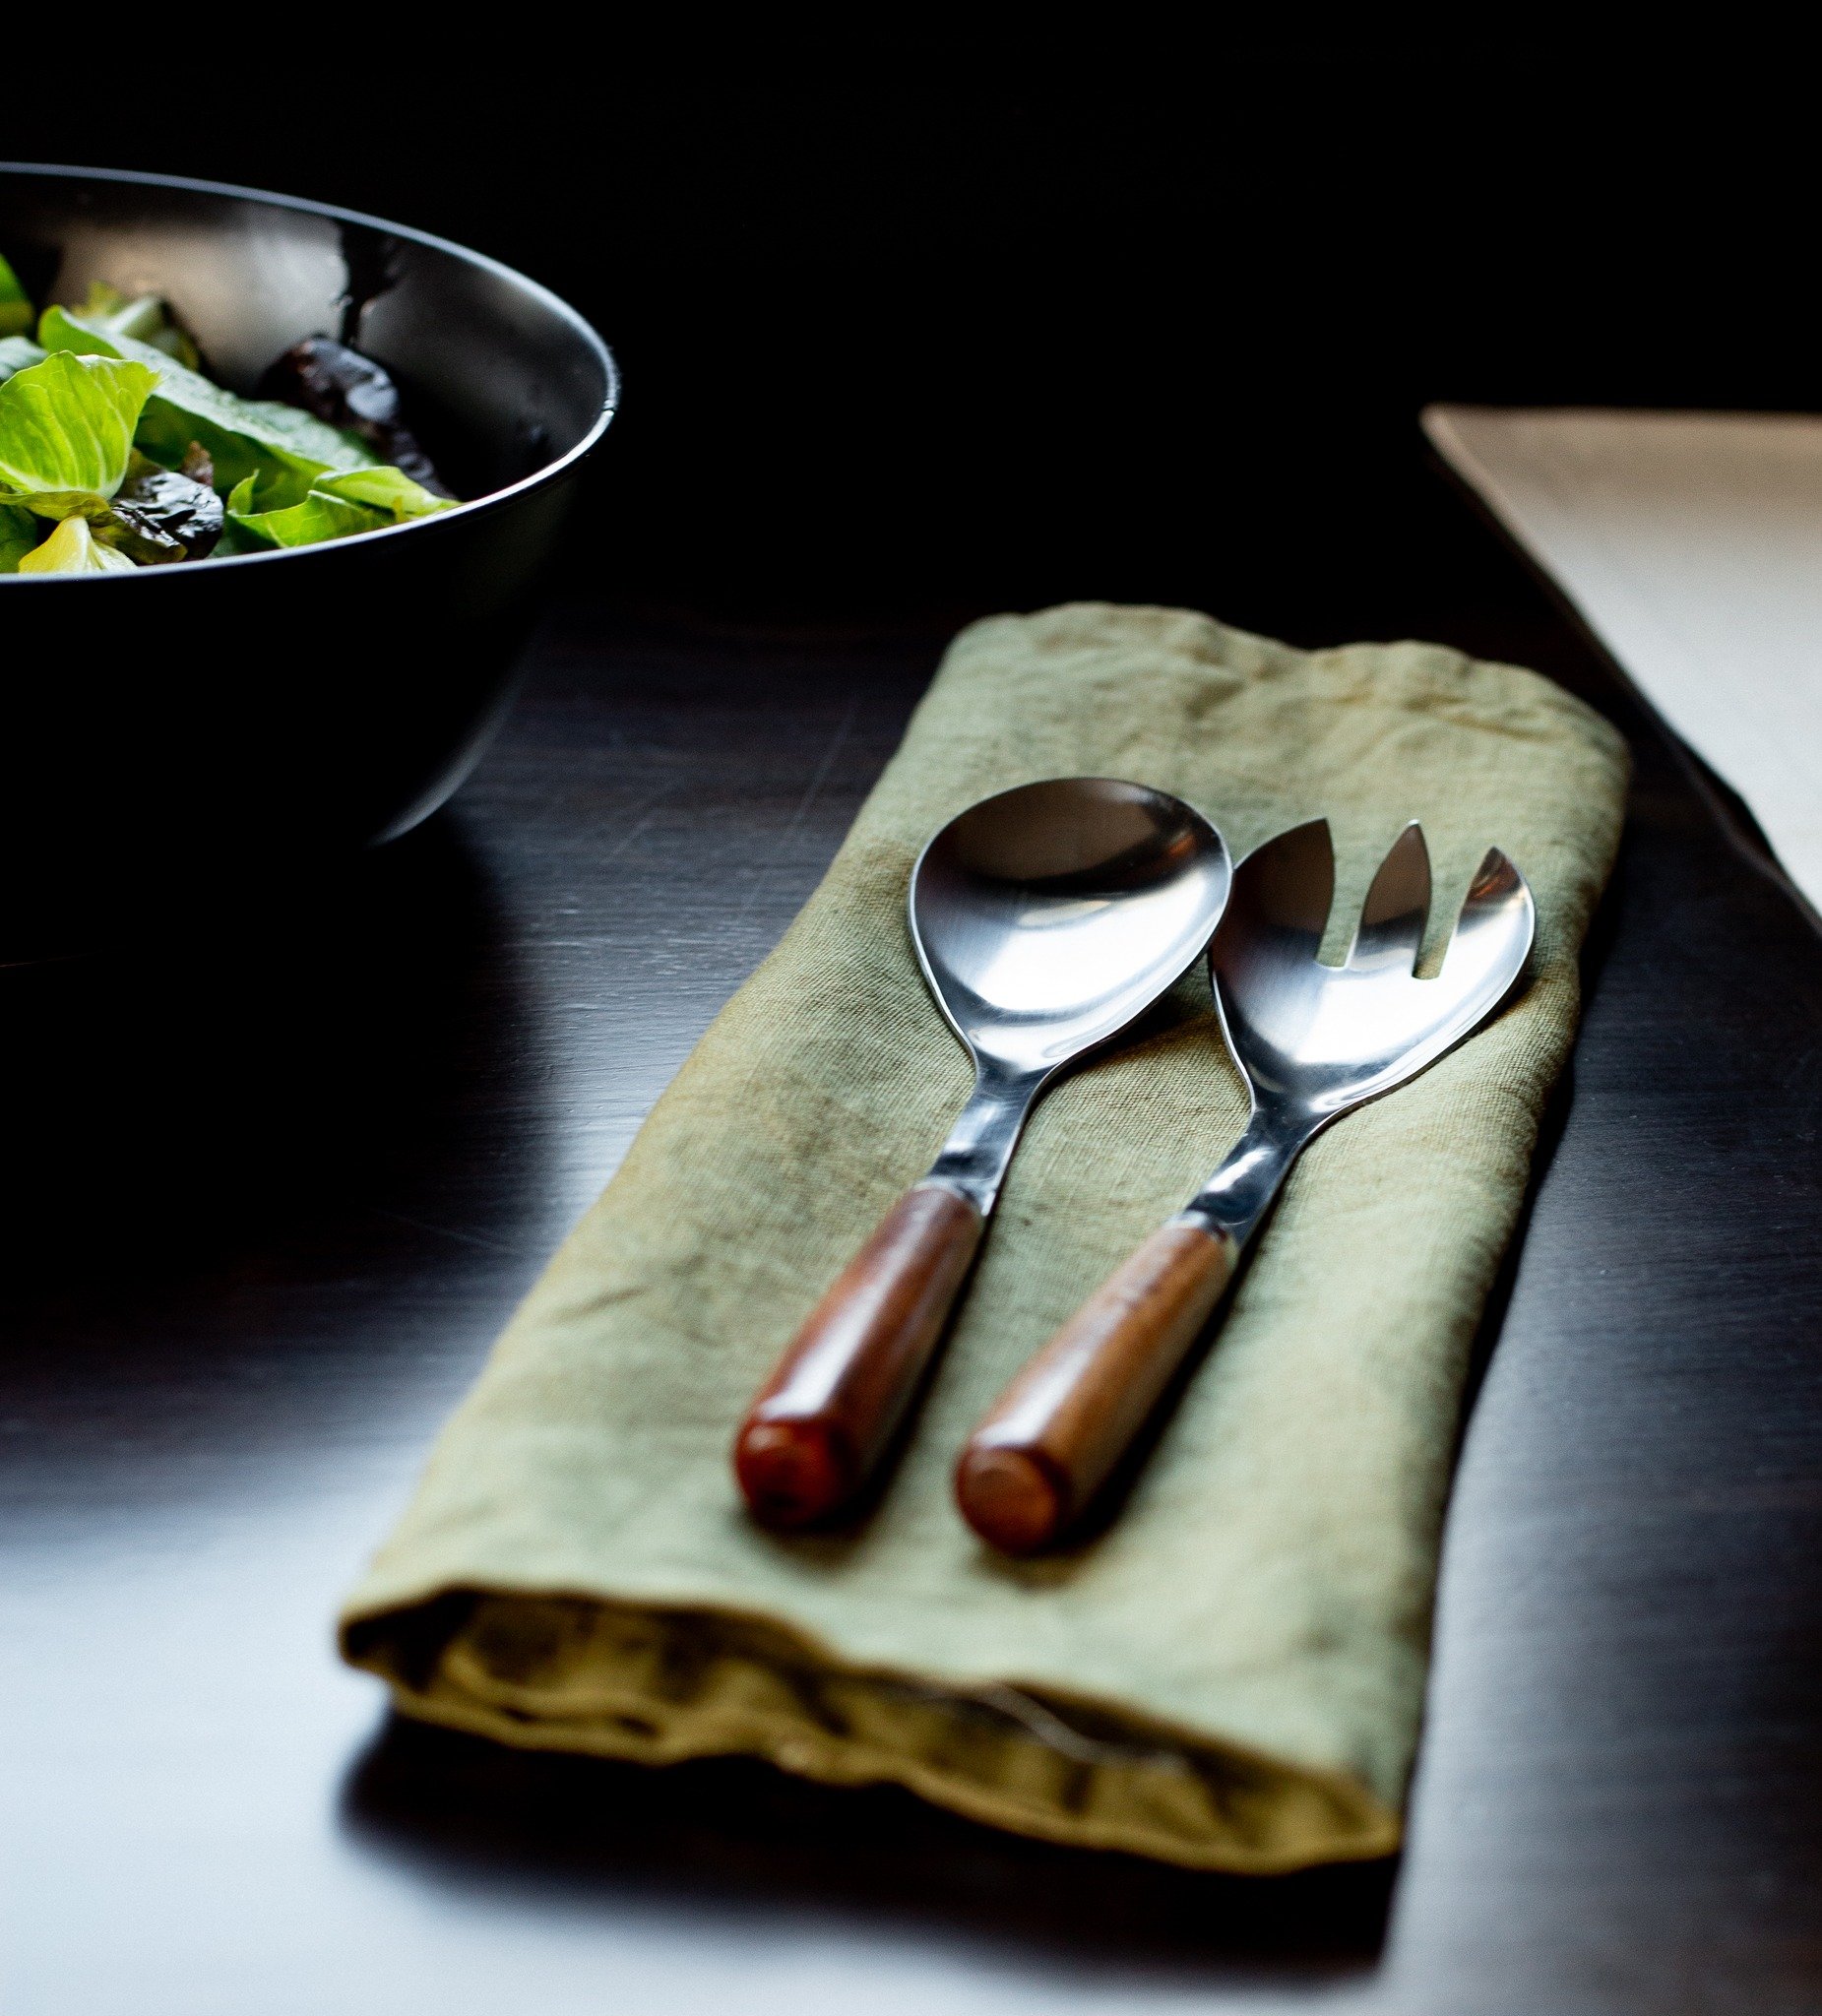 Our salad servers are a stylish and functional accessory for anyone who loves to entertain or simply enjoys a well-presented meal. 

Made from high-quality acacia wood and stainless steel, these servers are both durable and easy to clean, making them